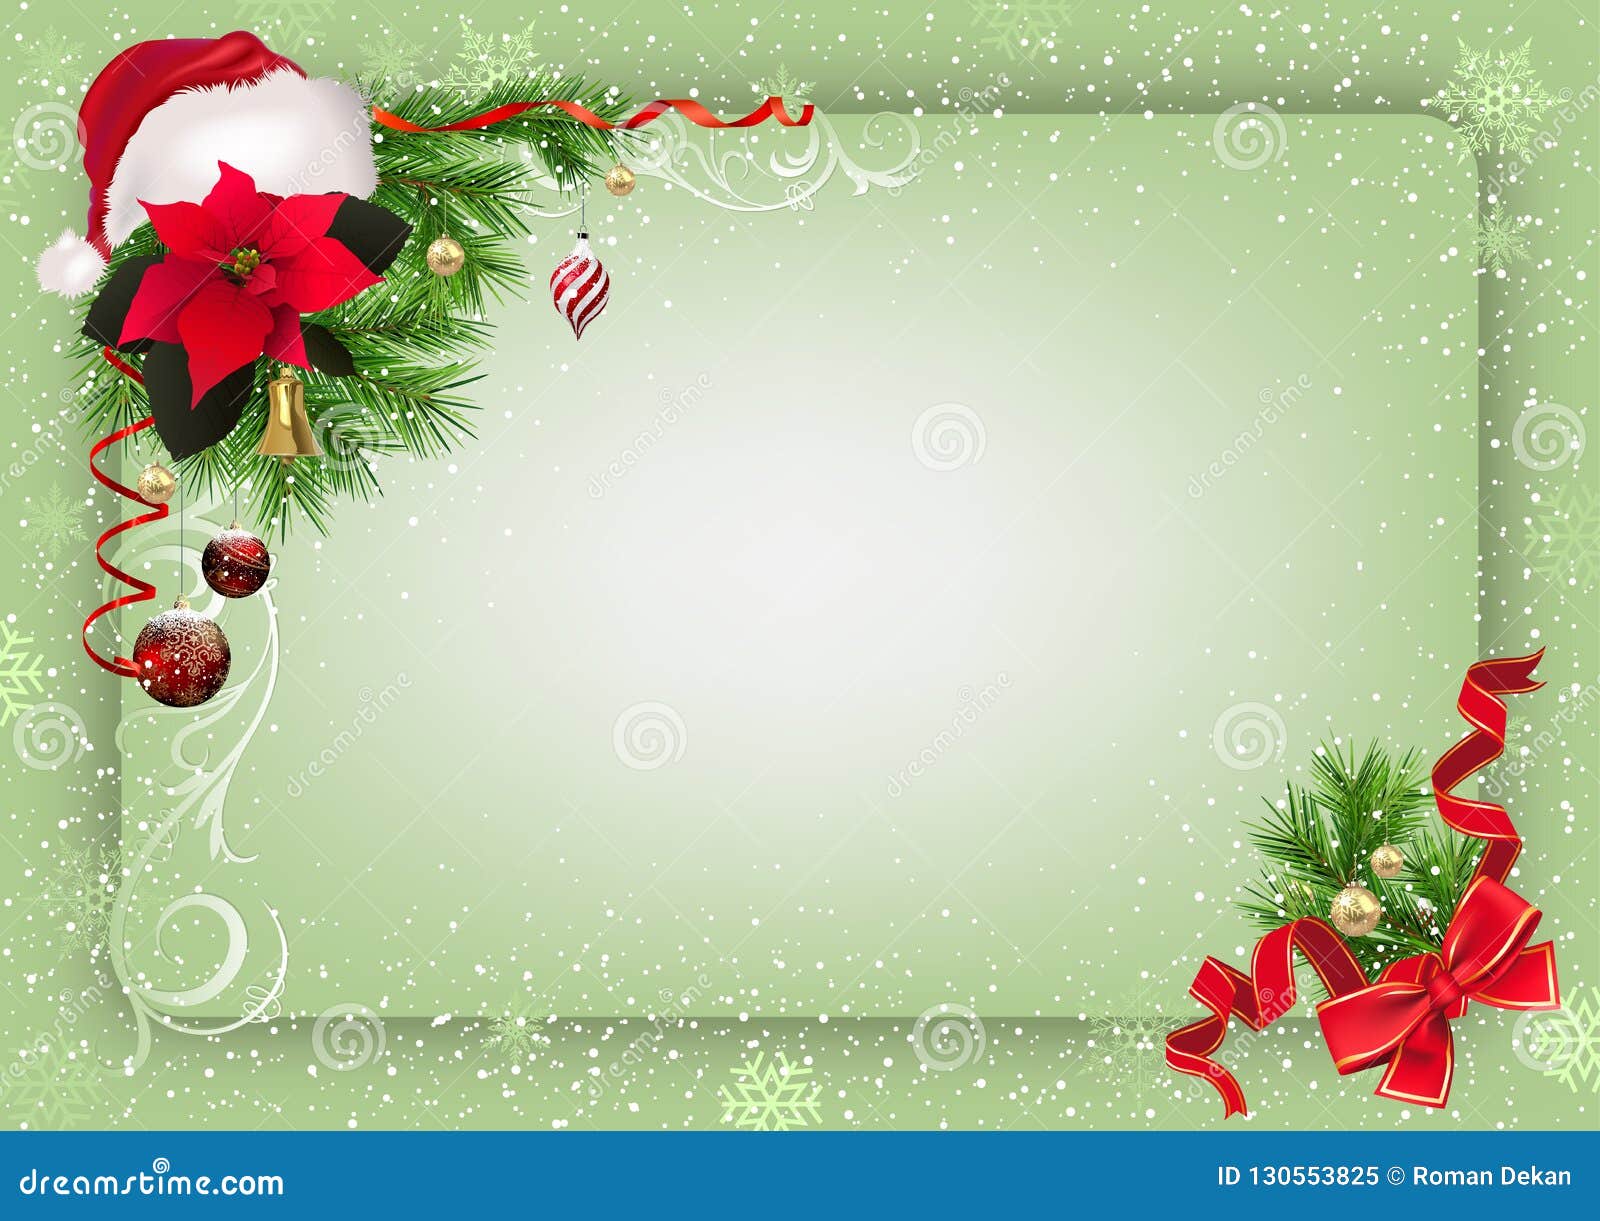 Green Christmas Background with Decorations and Snow Stock Vector ...